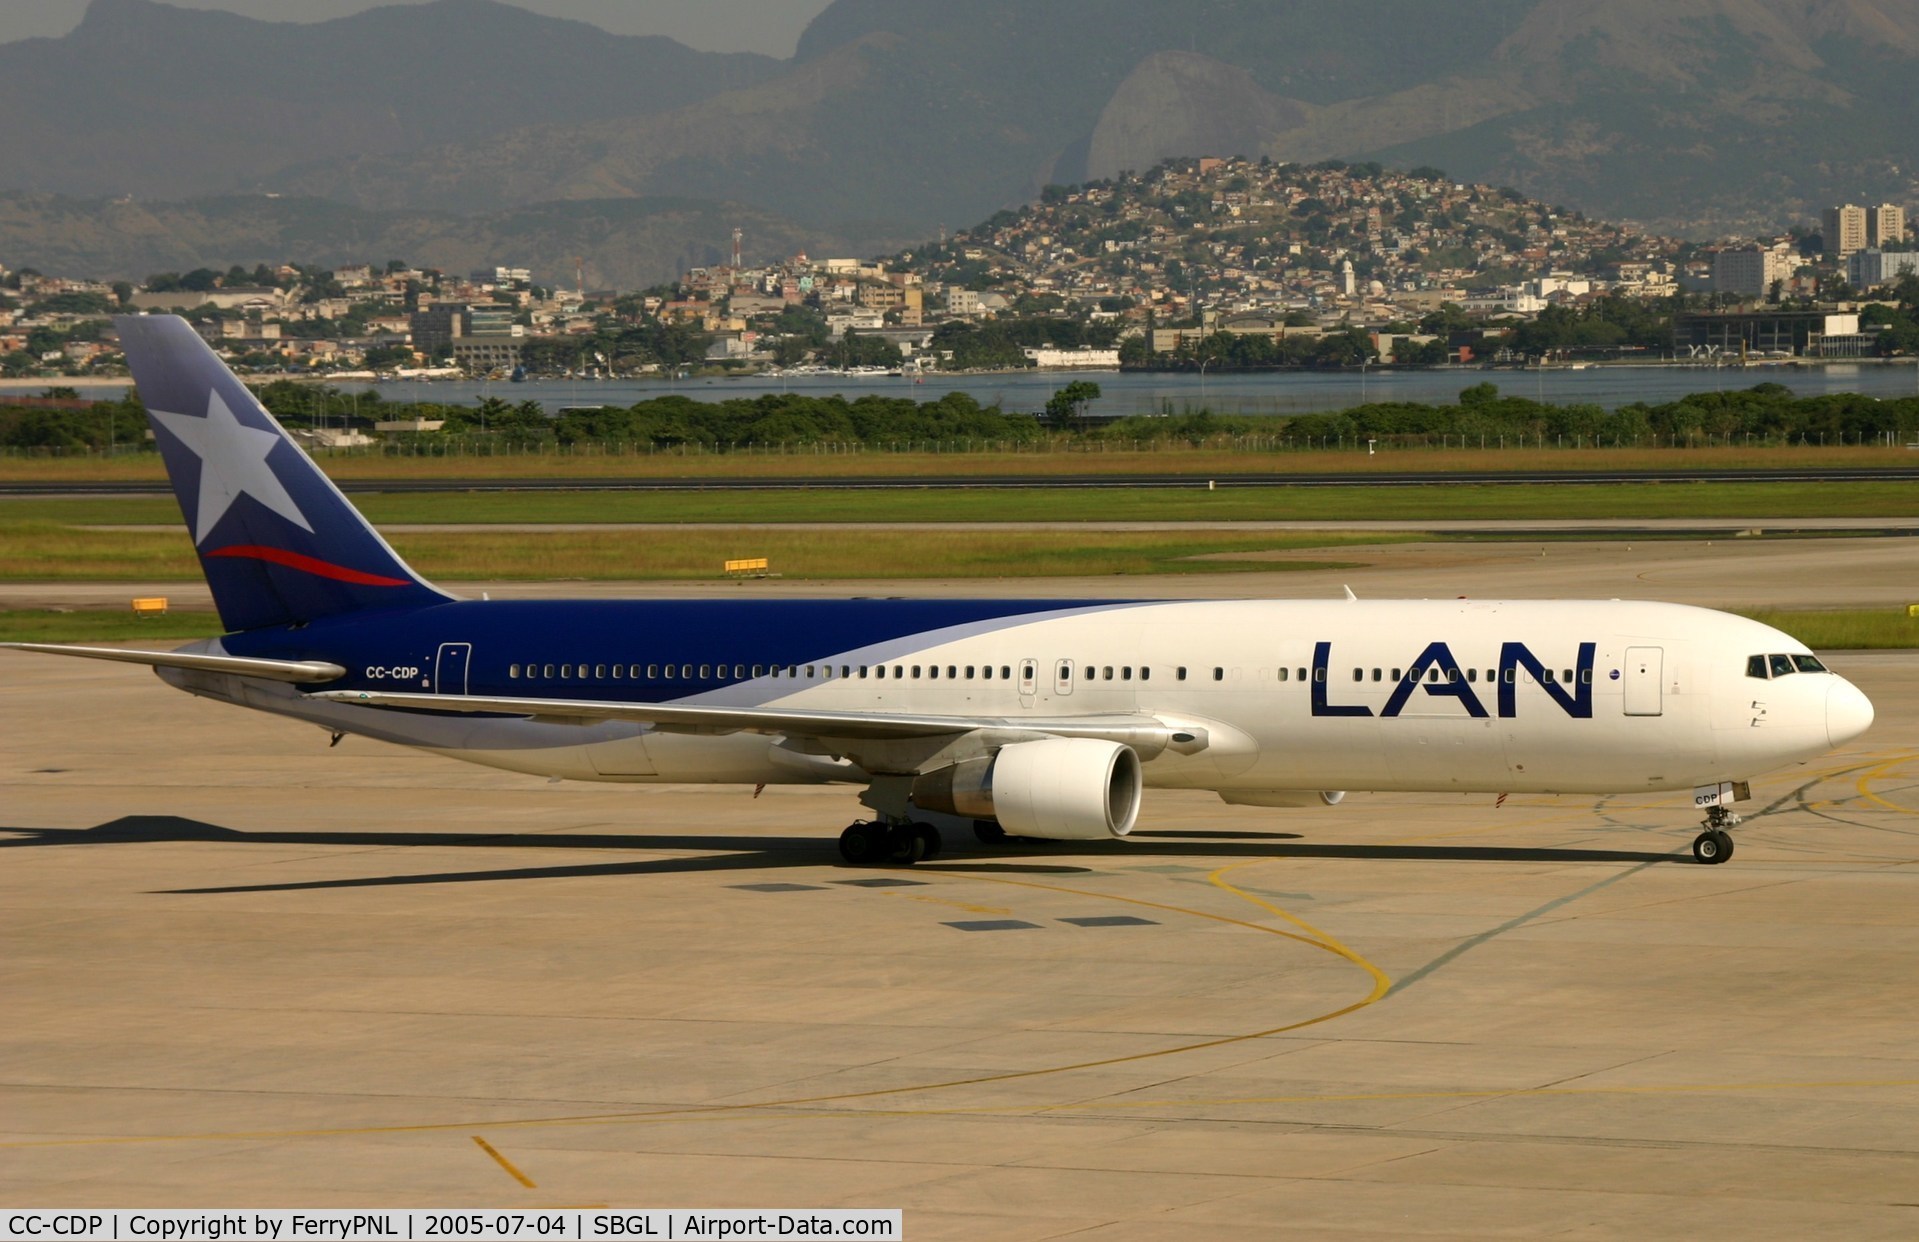 CC-CDP, 1996 Boeing 767-316/ER C/N 27597, LAN B763 taxiing in after arrival in GIG